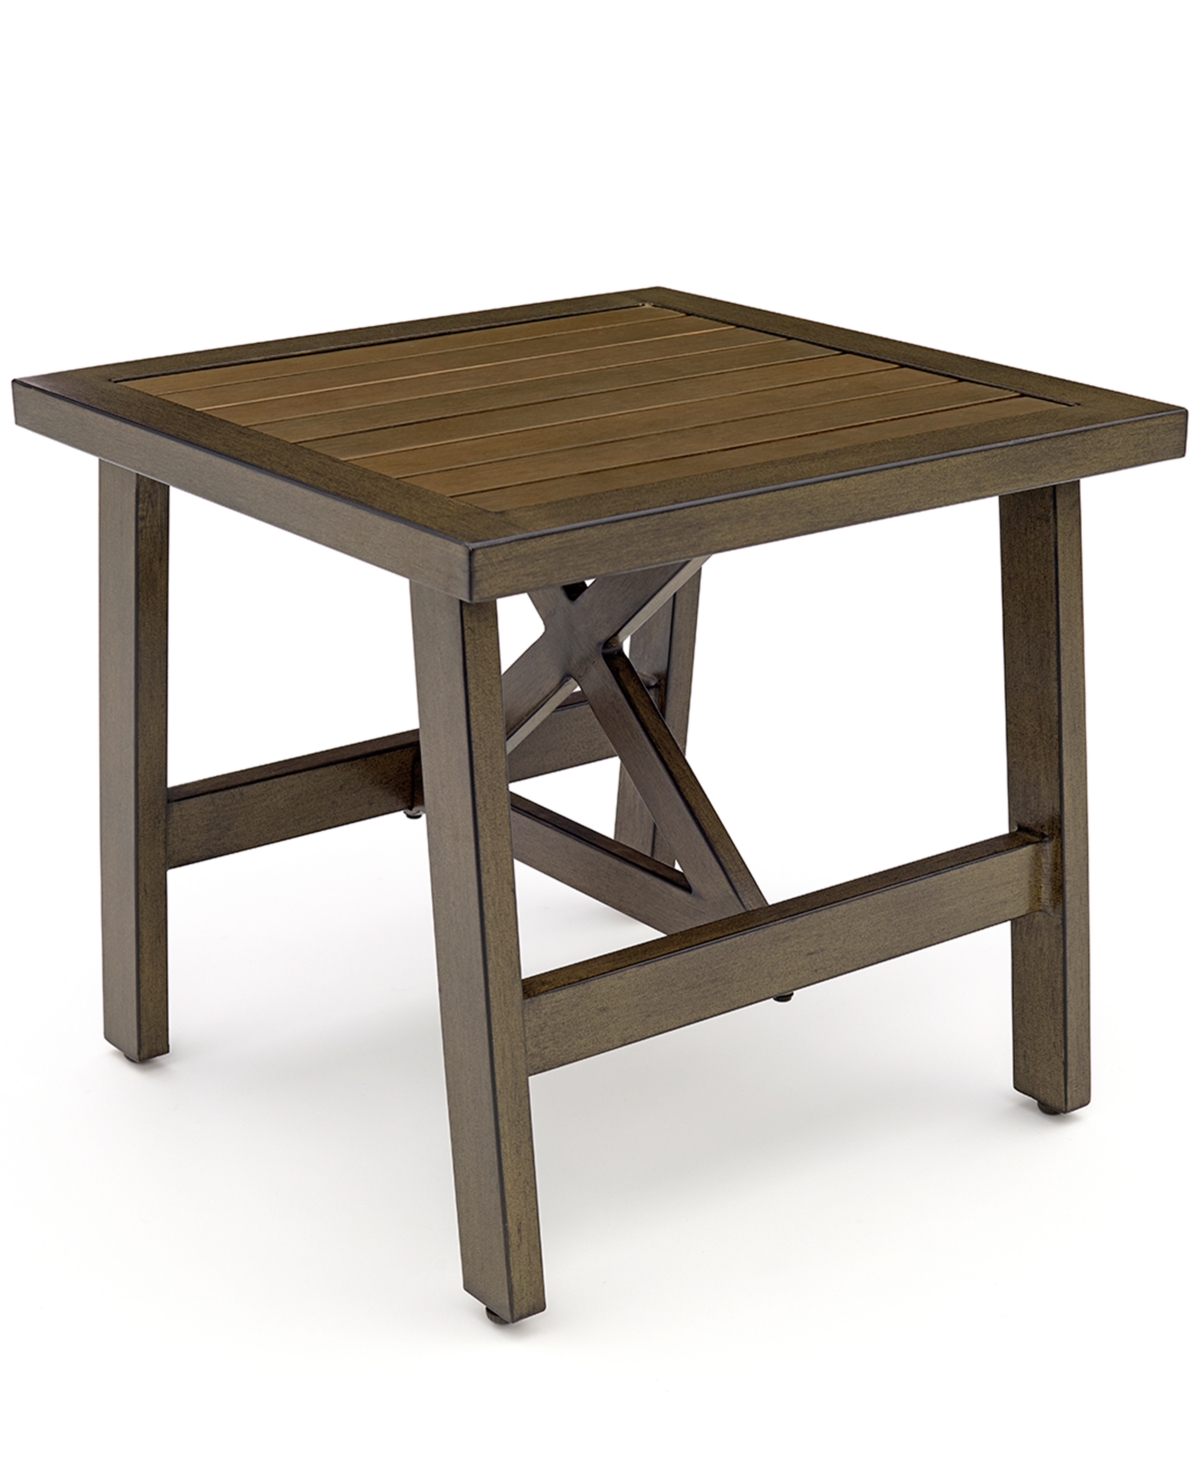 Kathan Outdoor End Table, Created for Macys